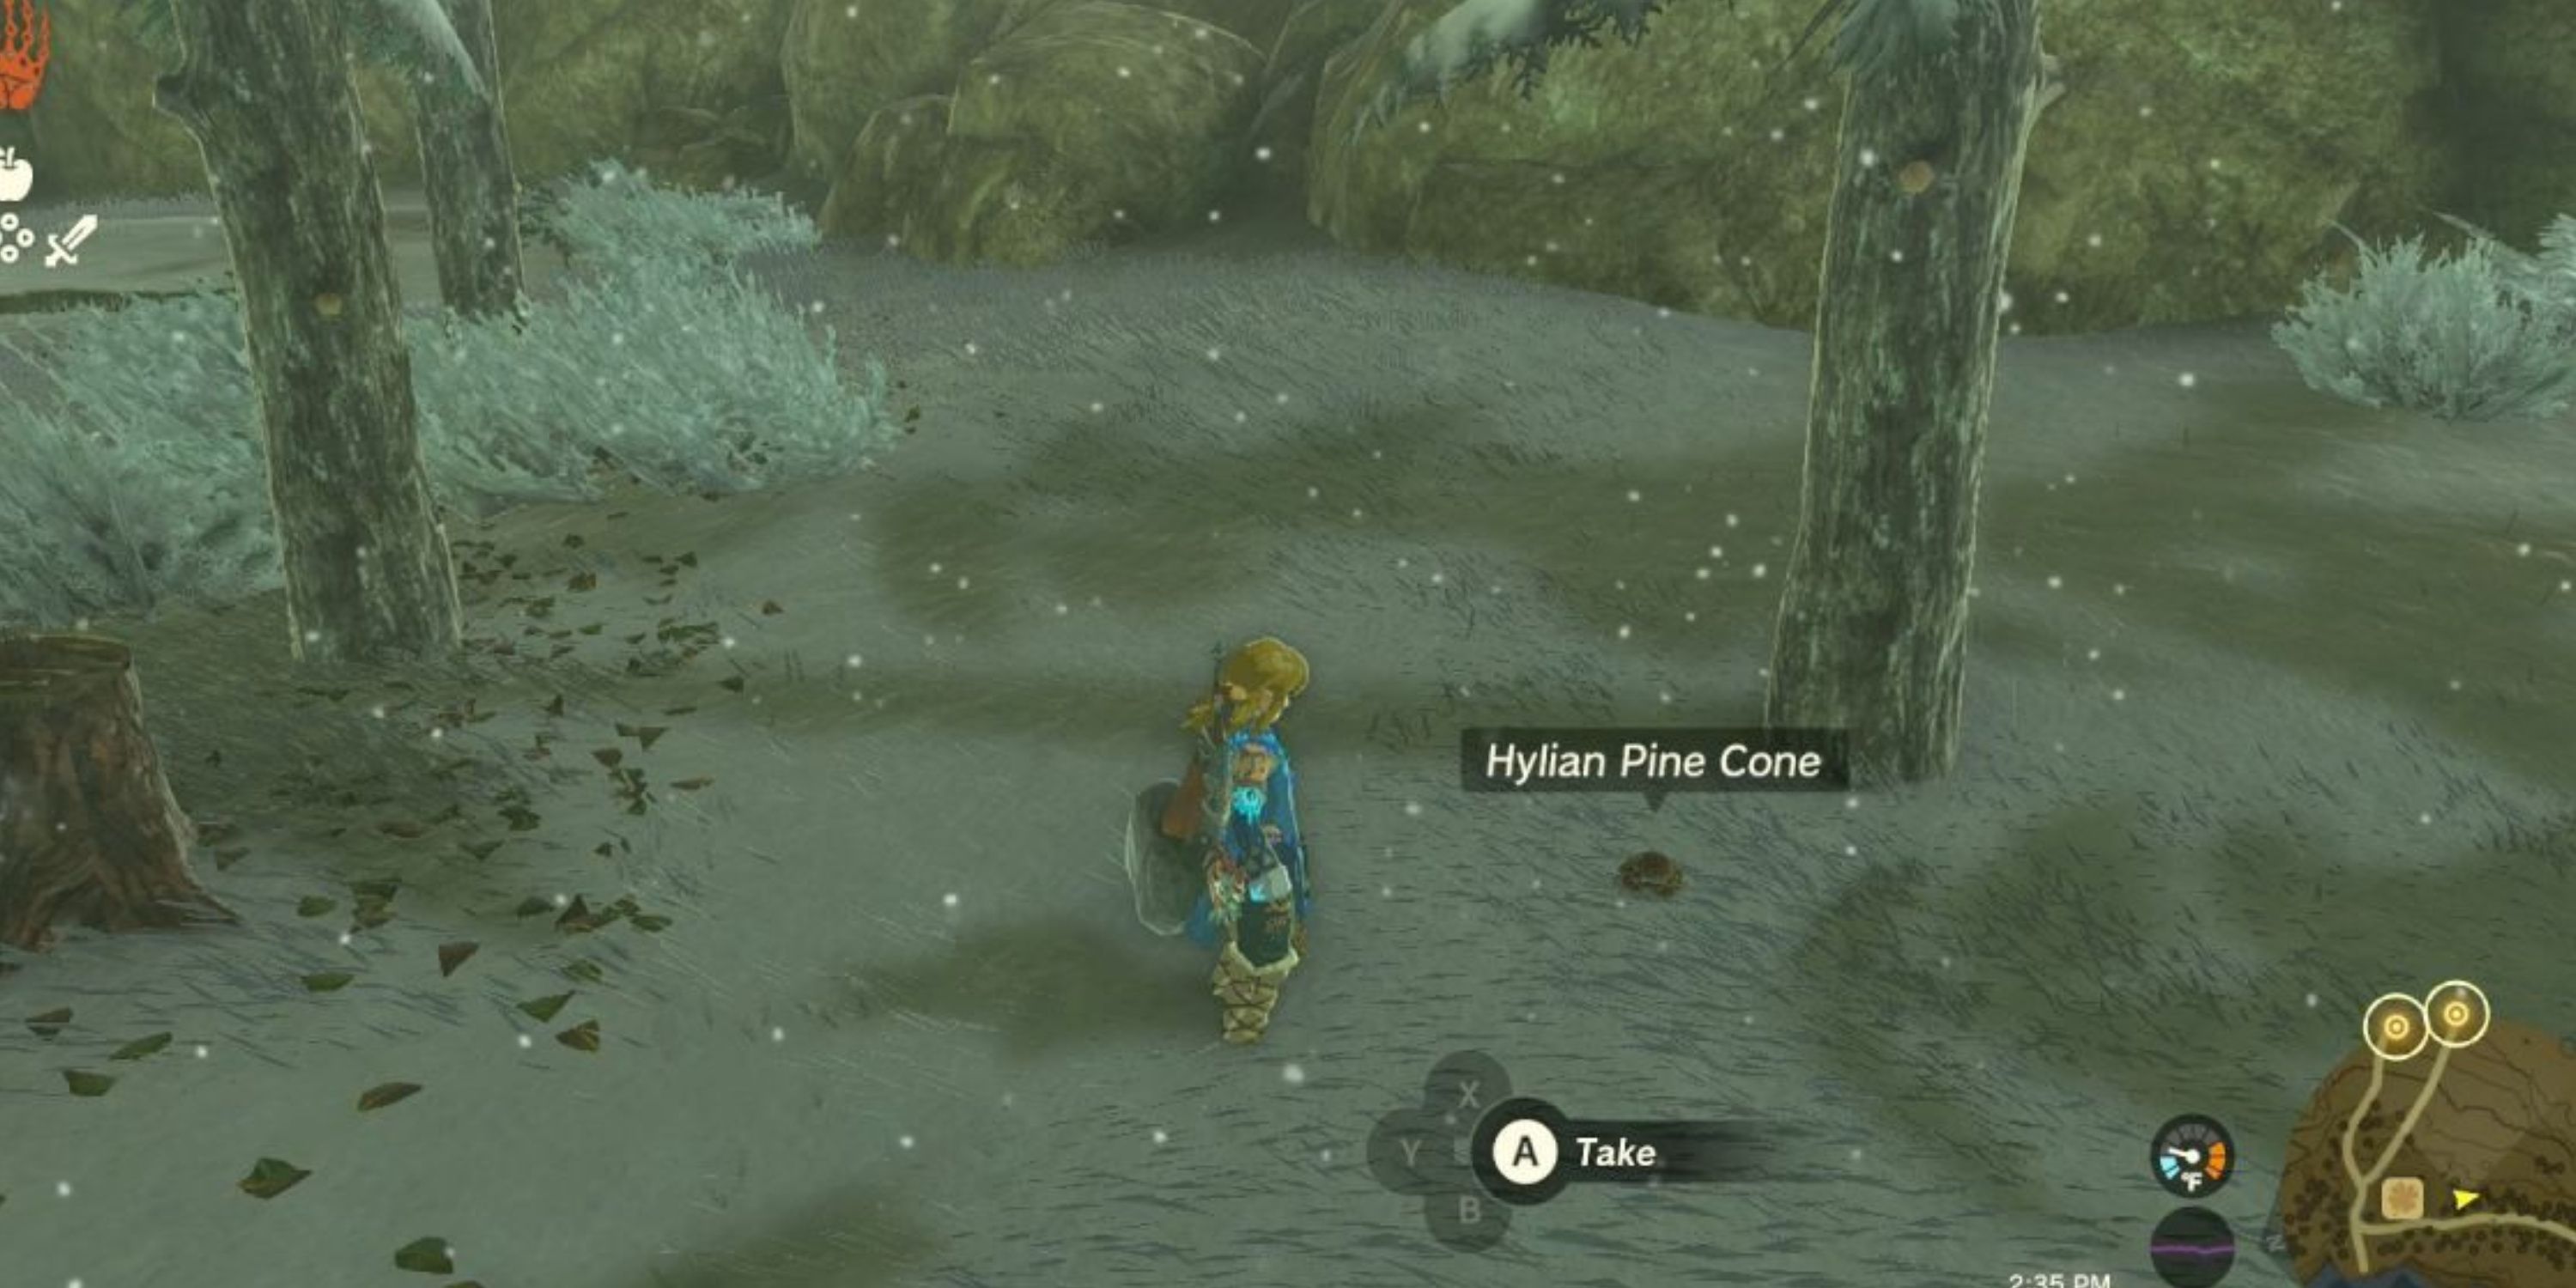 Hylian pine cones are small but filled with oil and will cause an explosion when thrown into a fire.